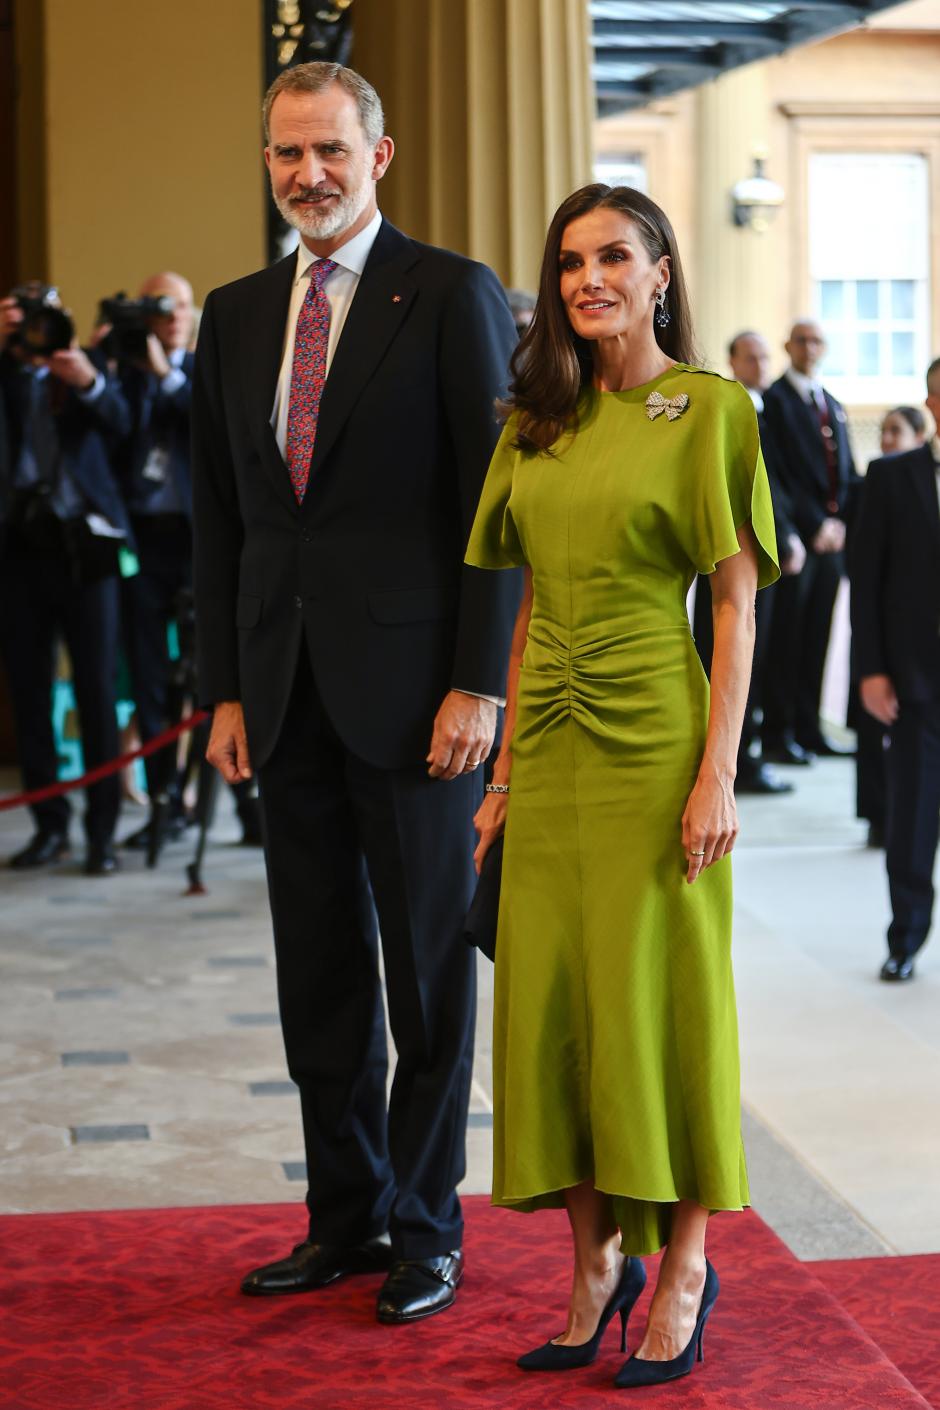 King Felipe VI and Queen Letizia of Spain during the reception for guests on the occasion of the coronation of King Charles III, London, United Kingdom - May 05, 2023